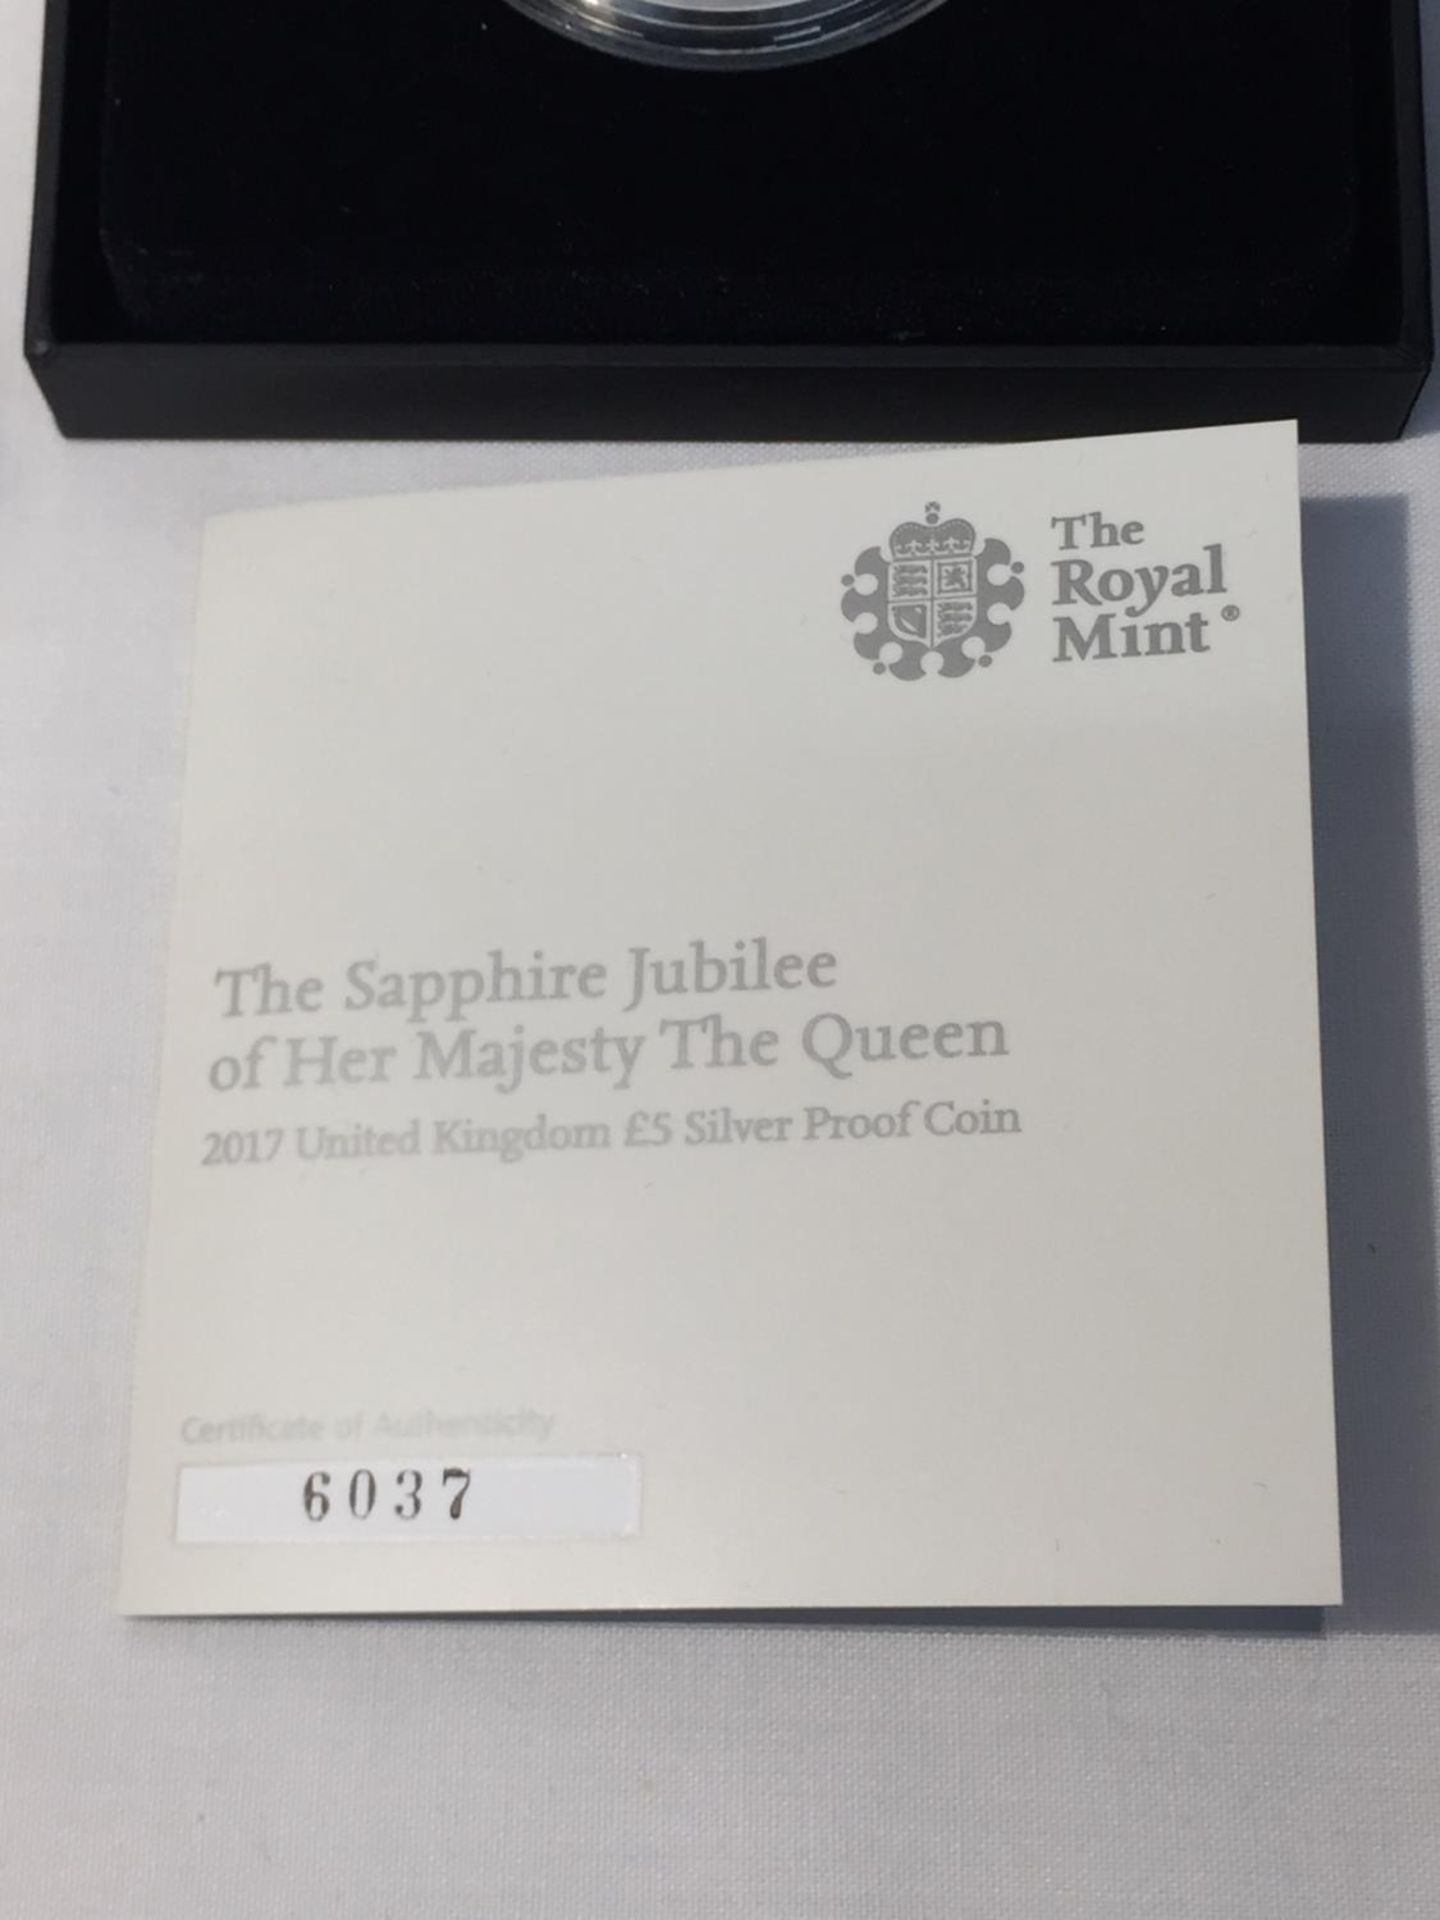 A UNITED KINGDOM ROYAL MINT 2017 “THE SAPPHIRE JUBILEE” SILVER PROOF £5 COIN, WITH COA - Image 4 of 5